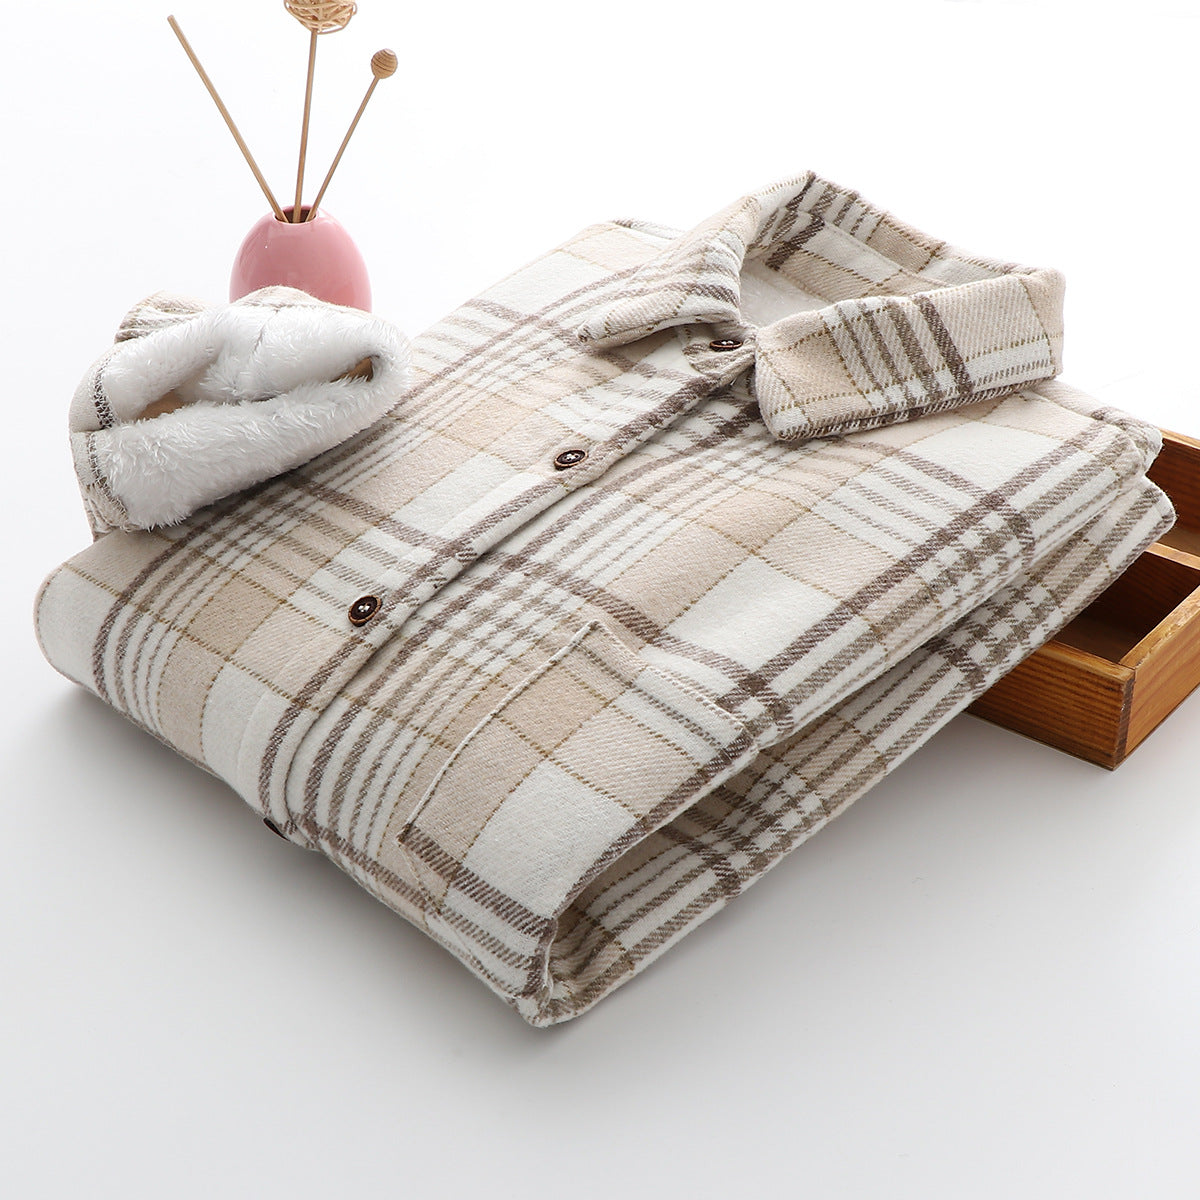 Warm Woolen Coat With Thick Plaid Shirt